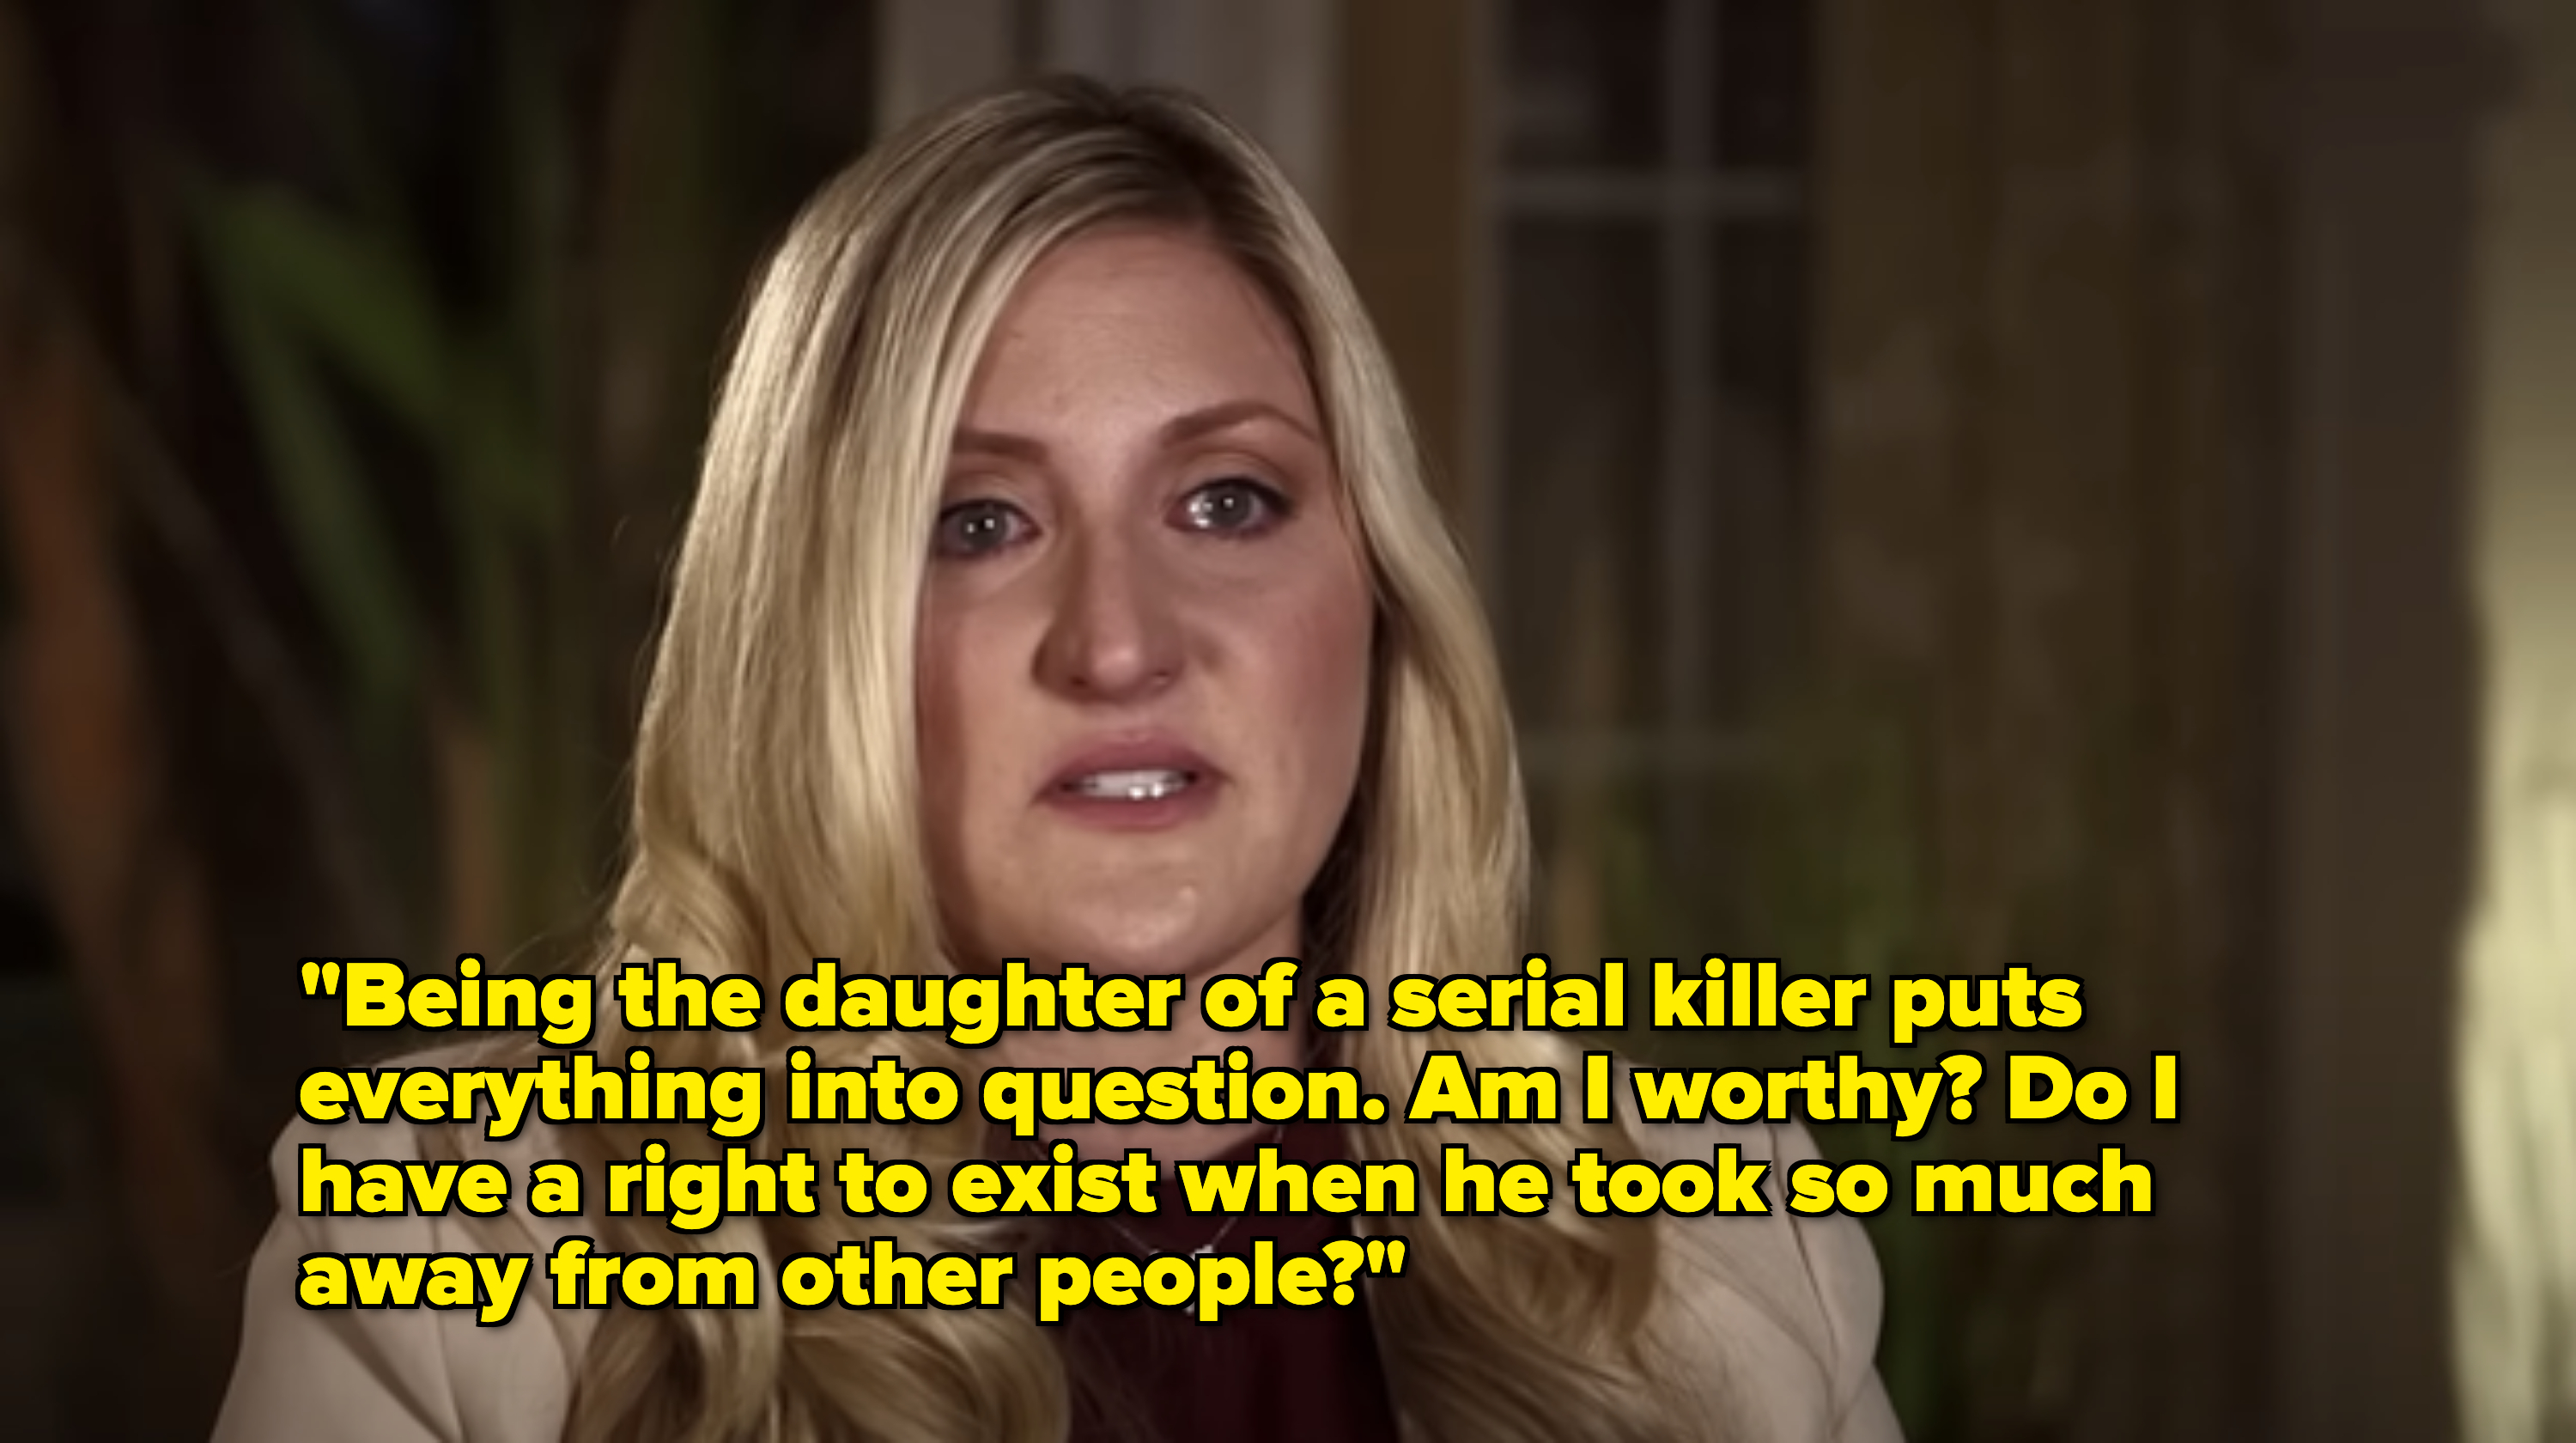 Melissa saying, &quot;Being the daughter of a serial killer puts everything into question; am I worthy? Do I have a right to exist when he took so much away from other people?&quot;